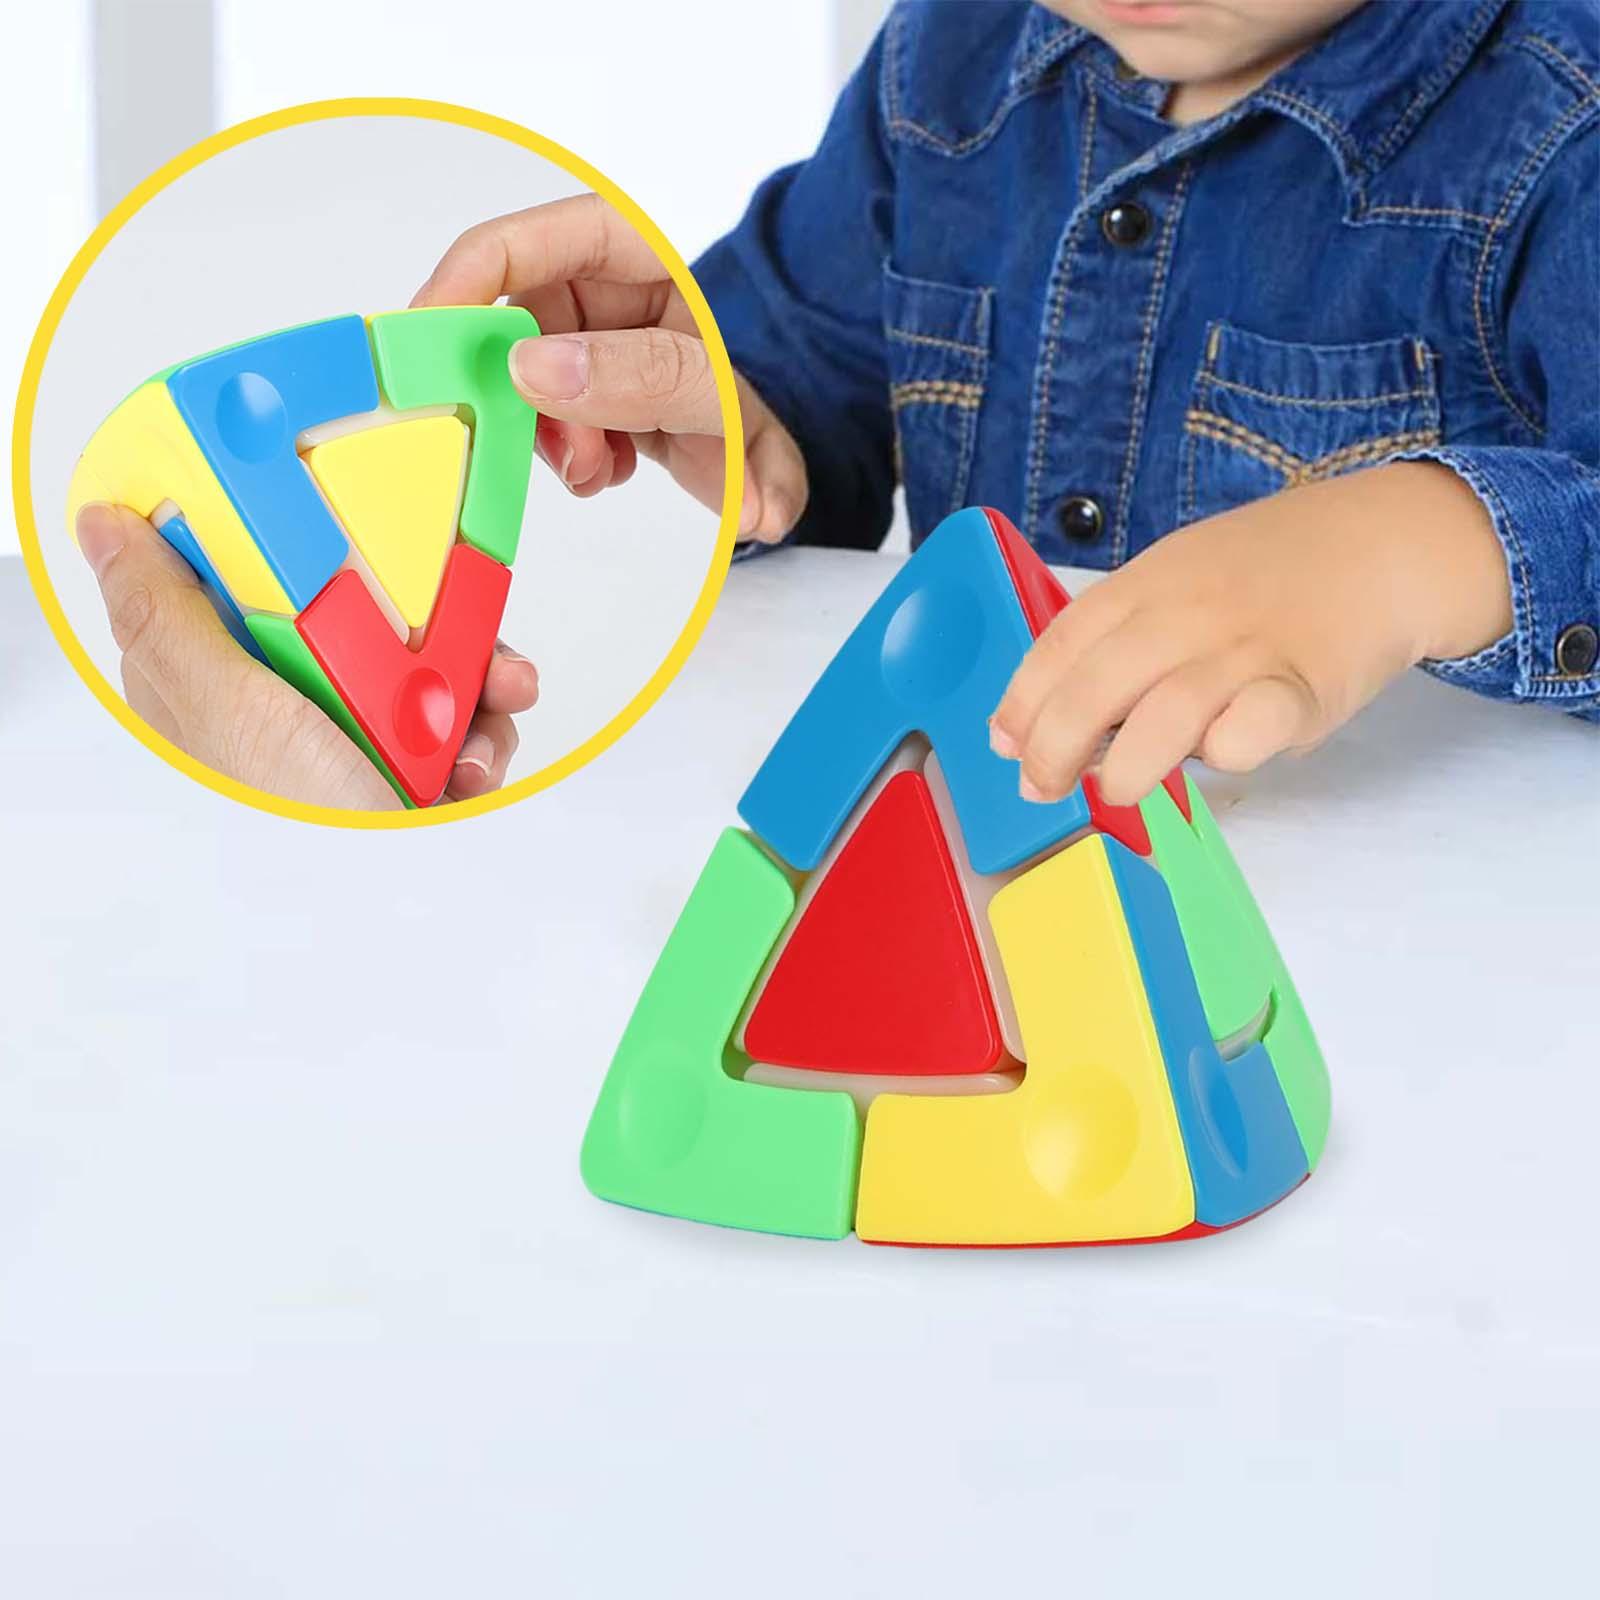 Cube Puzzles Toy Unique Birthday Brain Teasers Smoothly Sensory Toy fidget for adult Beginner Children Mini Gadget Kids